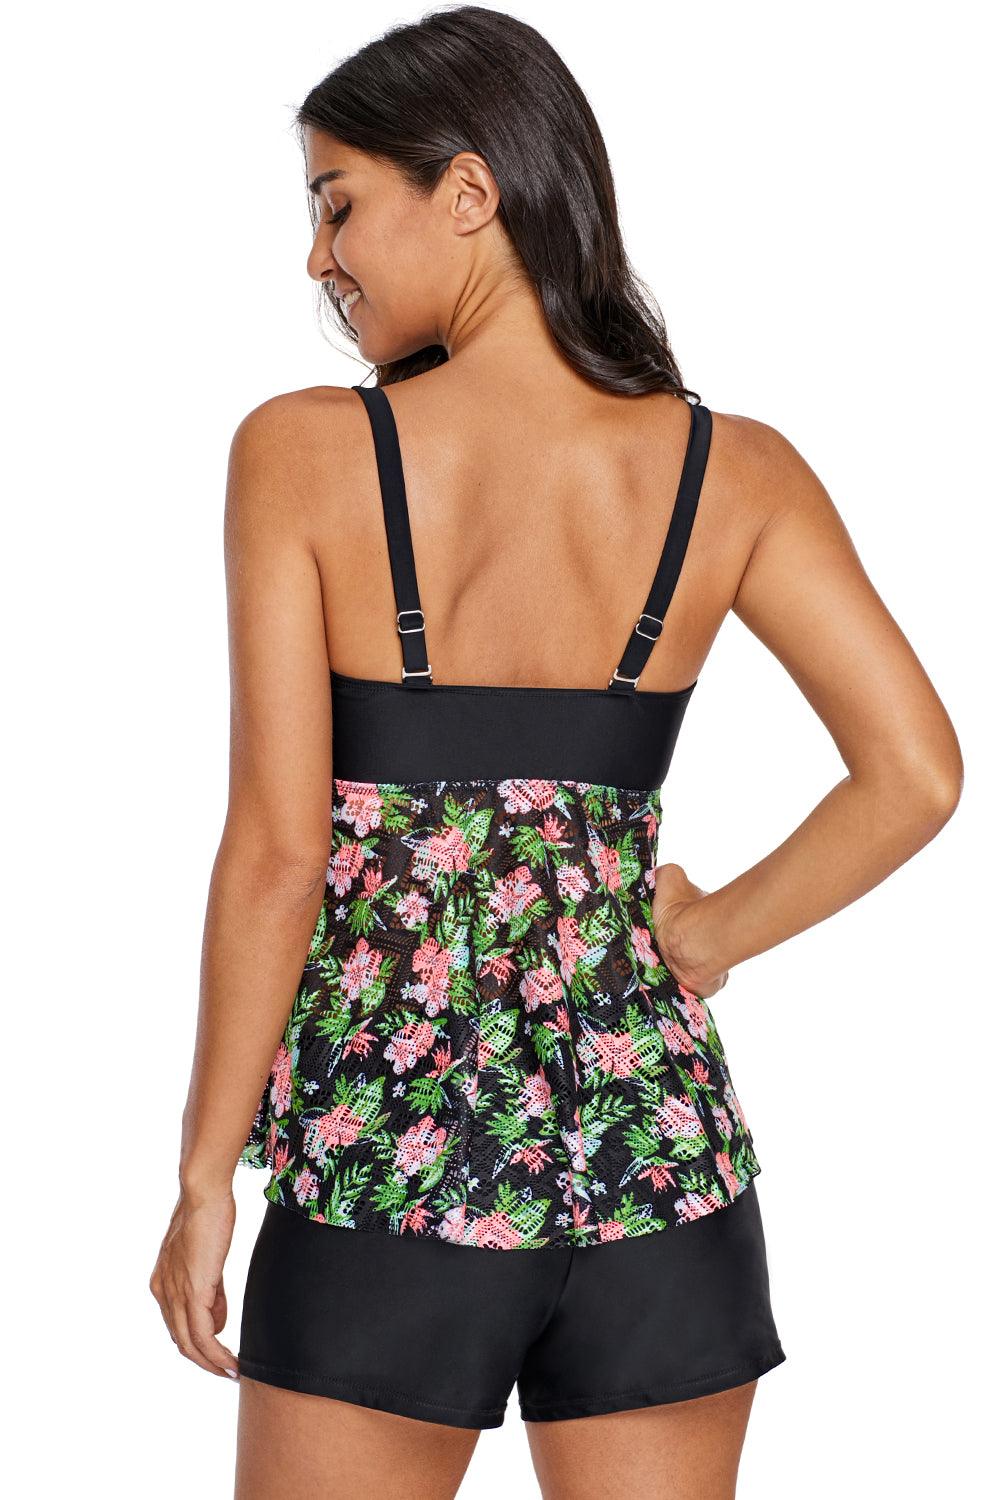 Floral Lacy Skirted Bandeau Tankini Top - L & M Kee, LLC